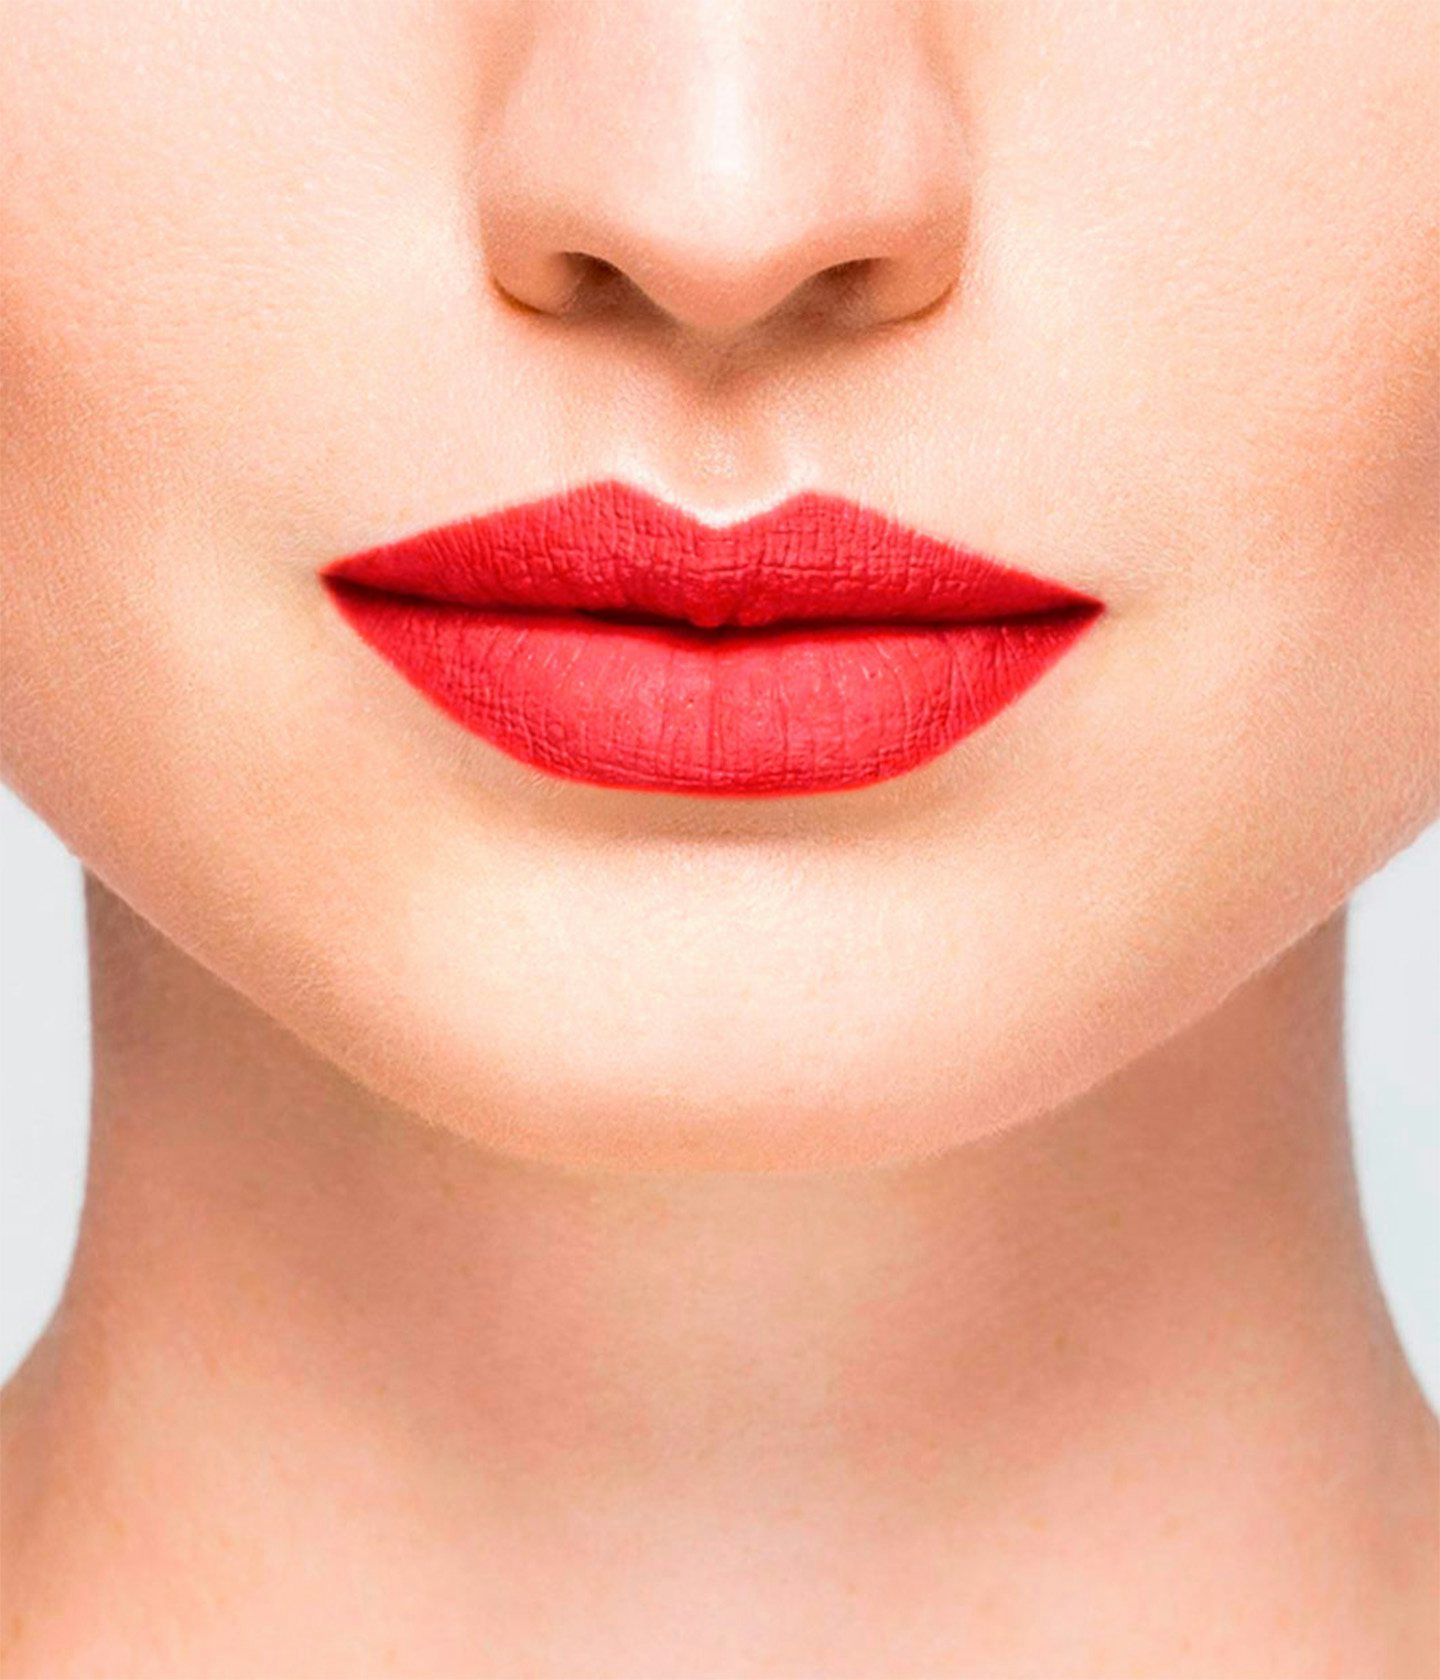 La bouche rouge Le Rouge Montaigne lipstick shade on the lips of a fair skin model